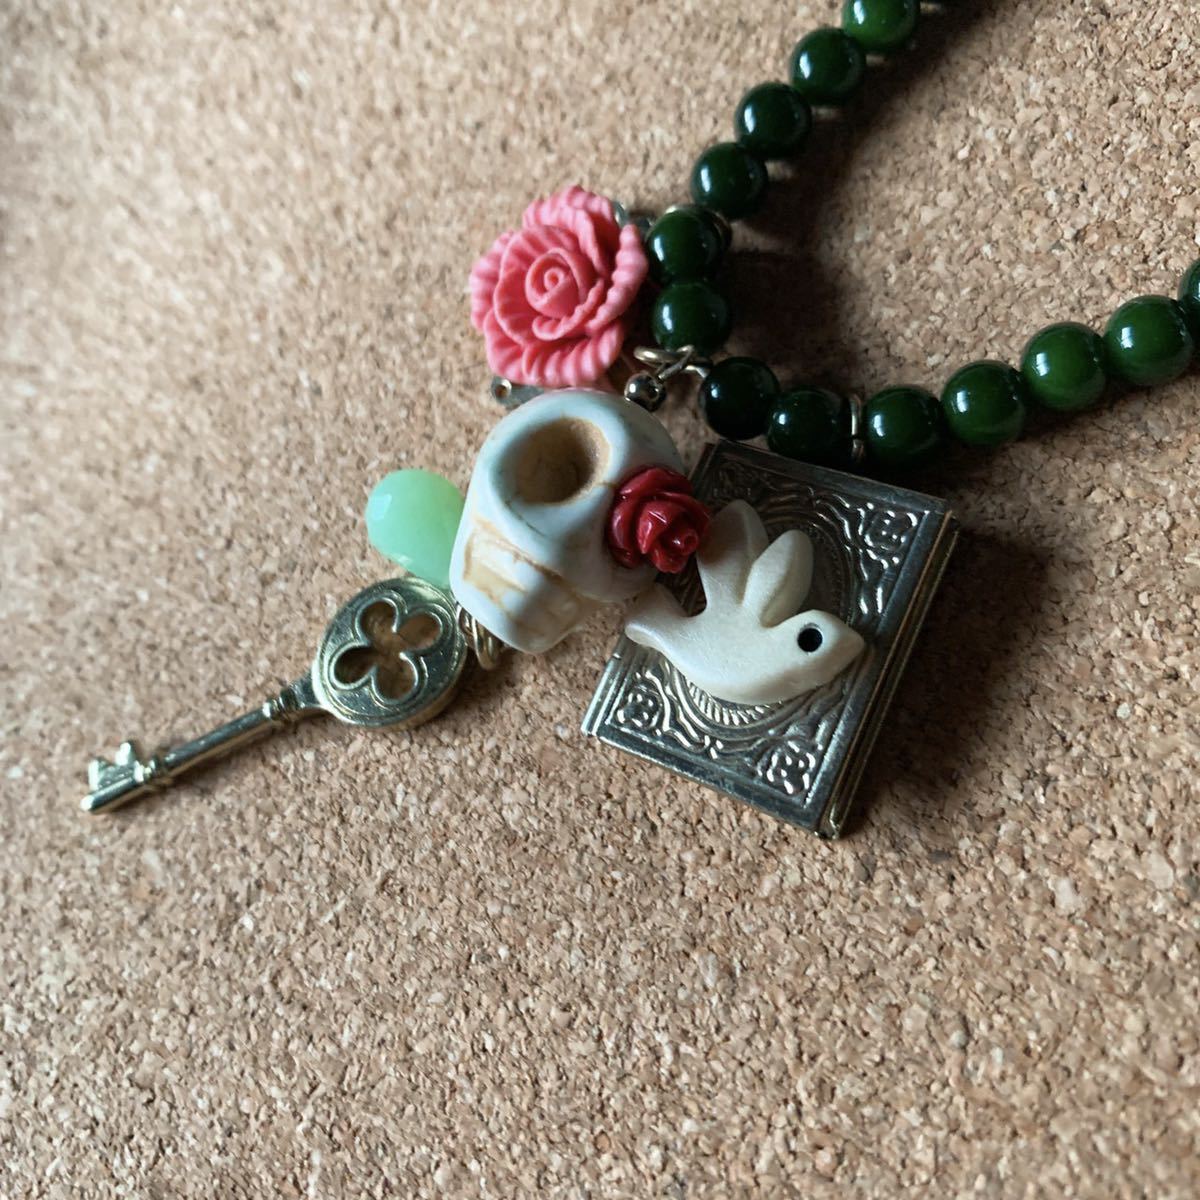 Free shipping◇Good condition◆Gothic design skull rose pigeon key ST_M2, Handmade, Accessories (for women), necklace, pendant, choker